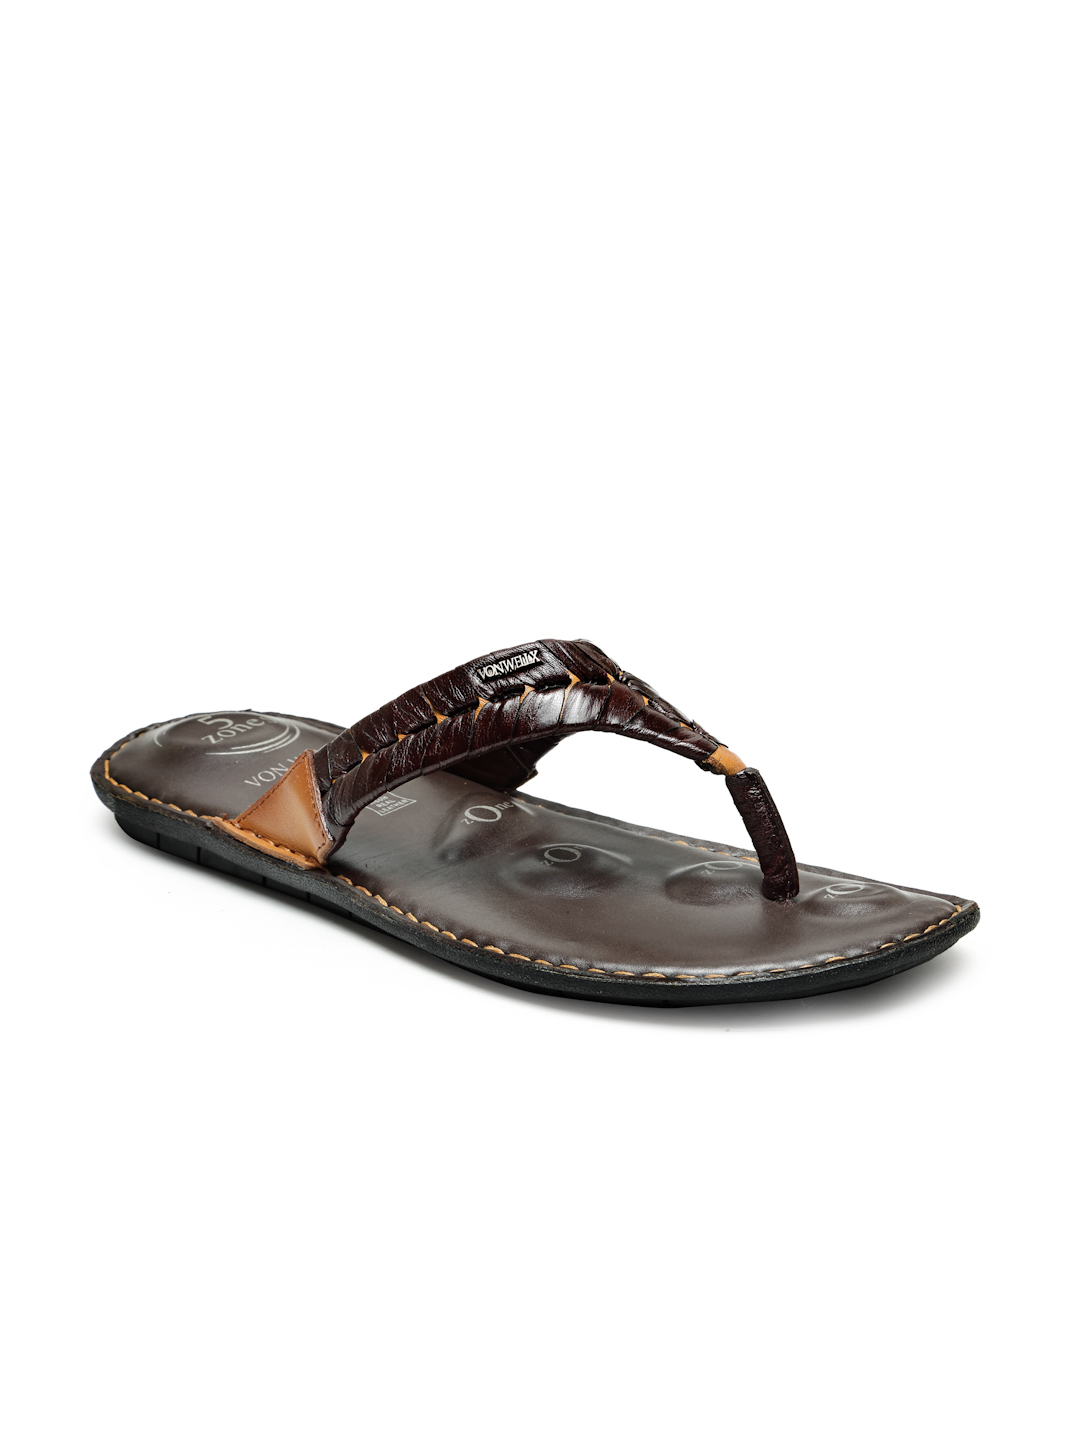 Buy Von Wellx Germany Comfort Men's Tan Slippers Alonso Online in Bhopal